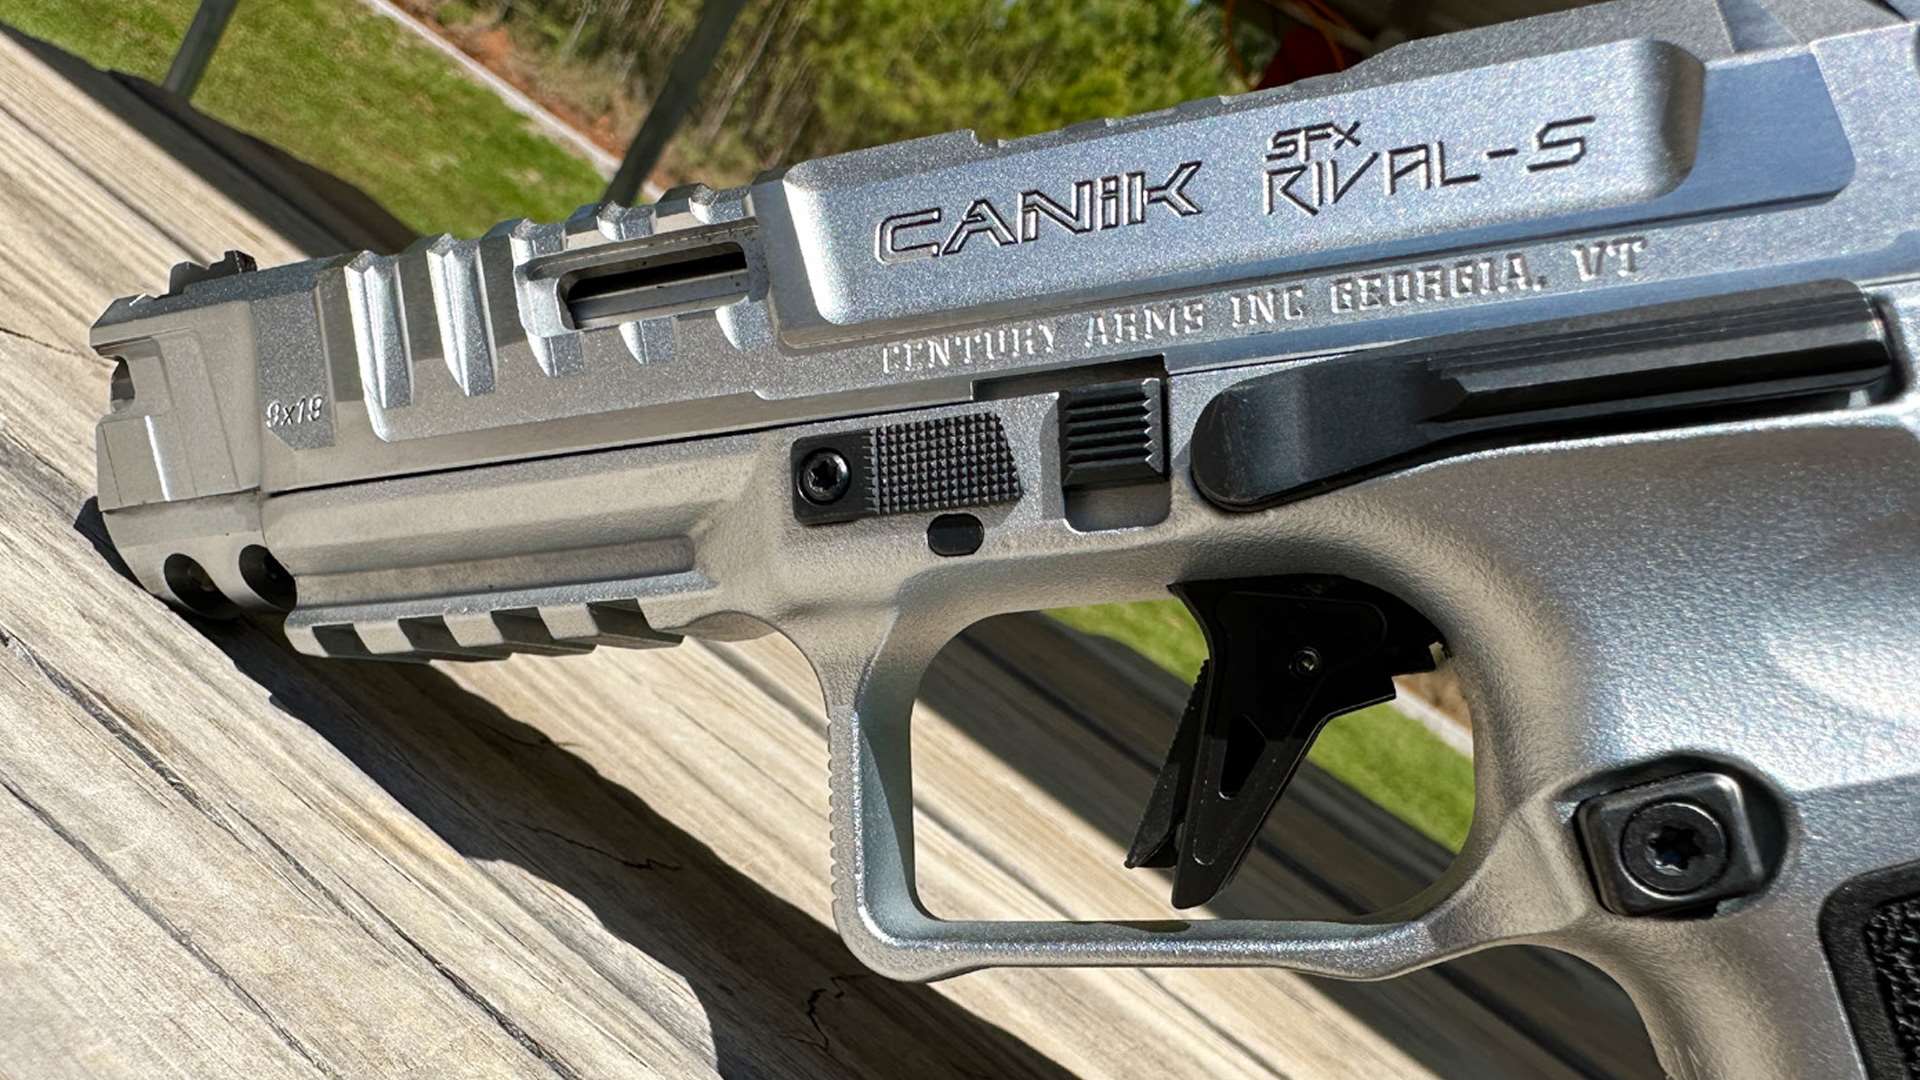 Canik SFx Rival-S